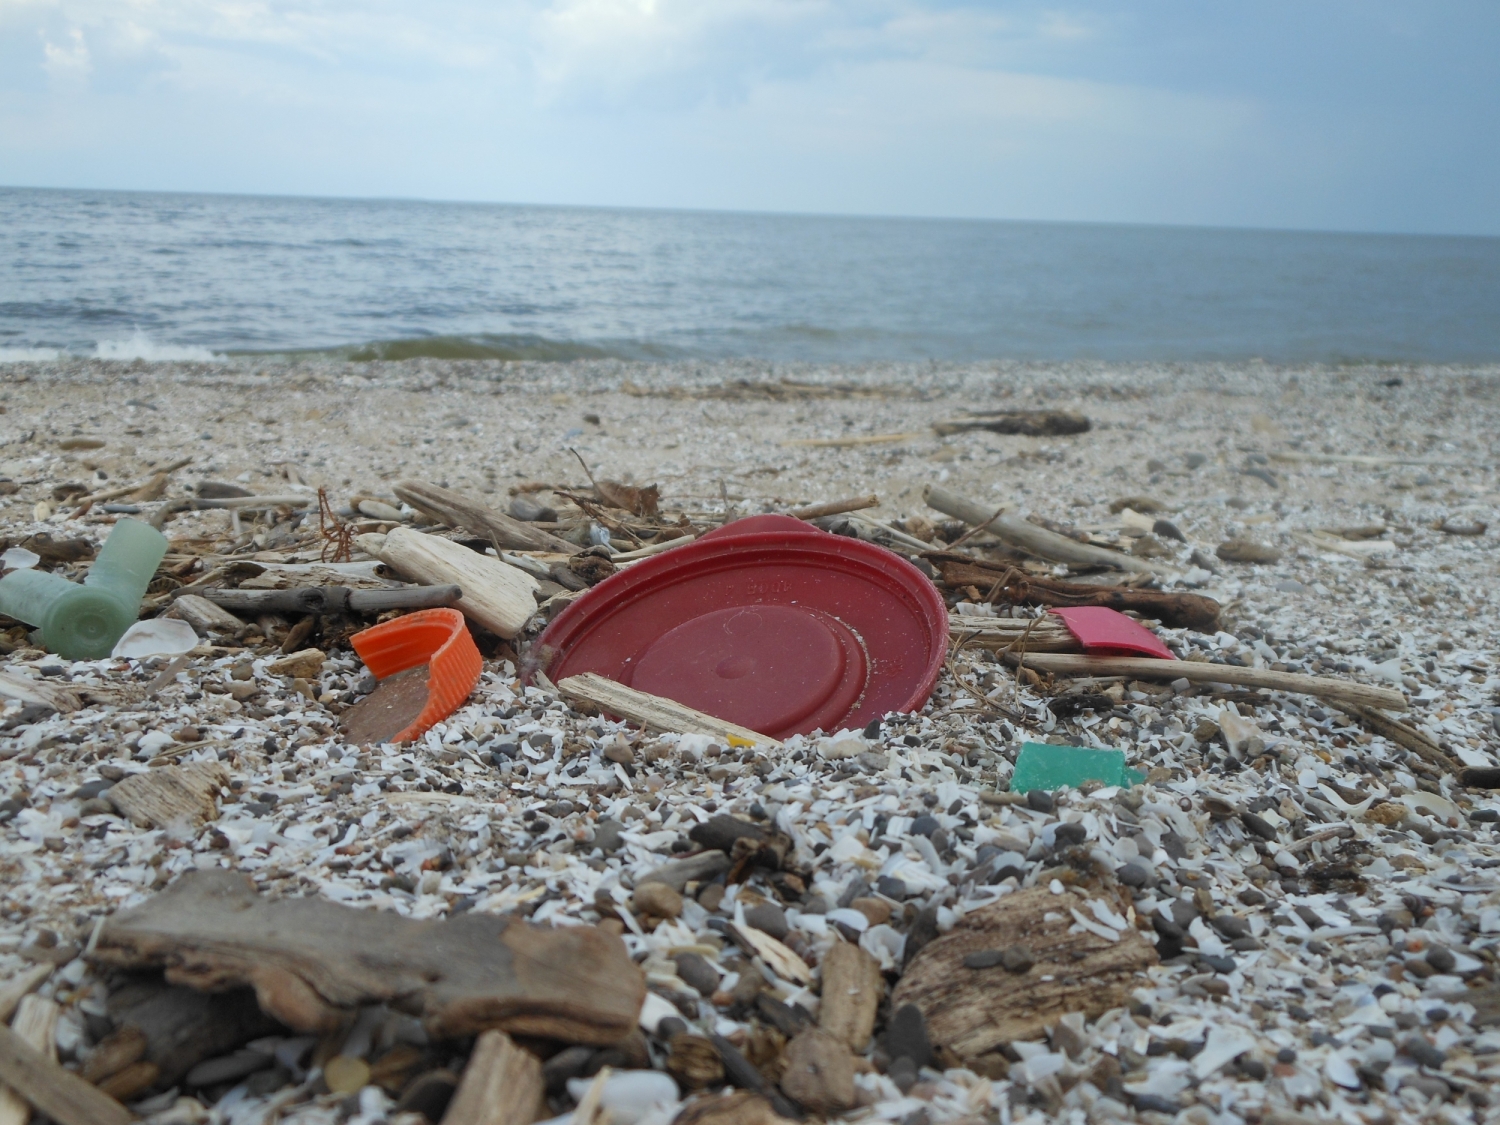 Plastic debris on a beach with water in the background.